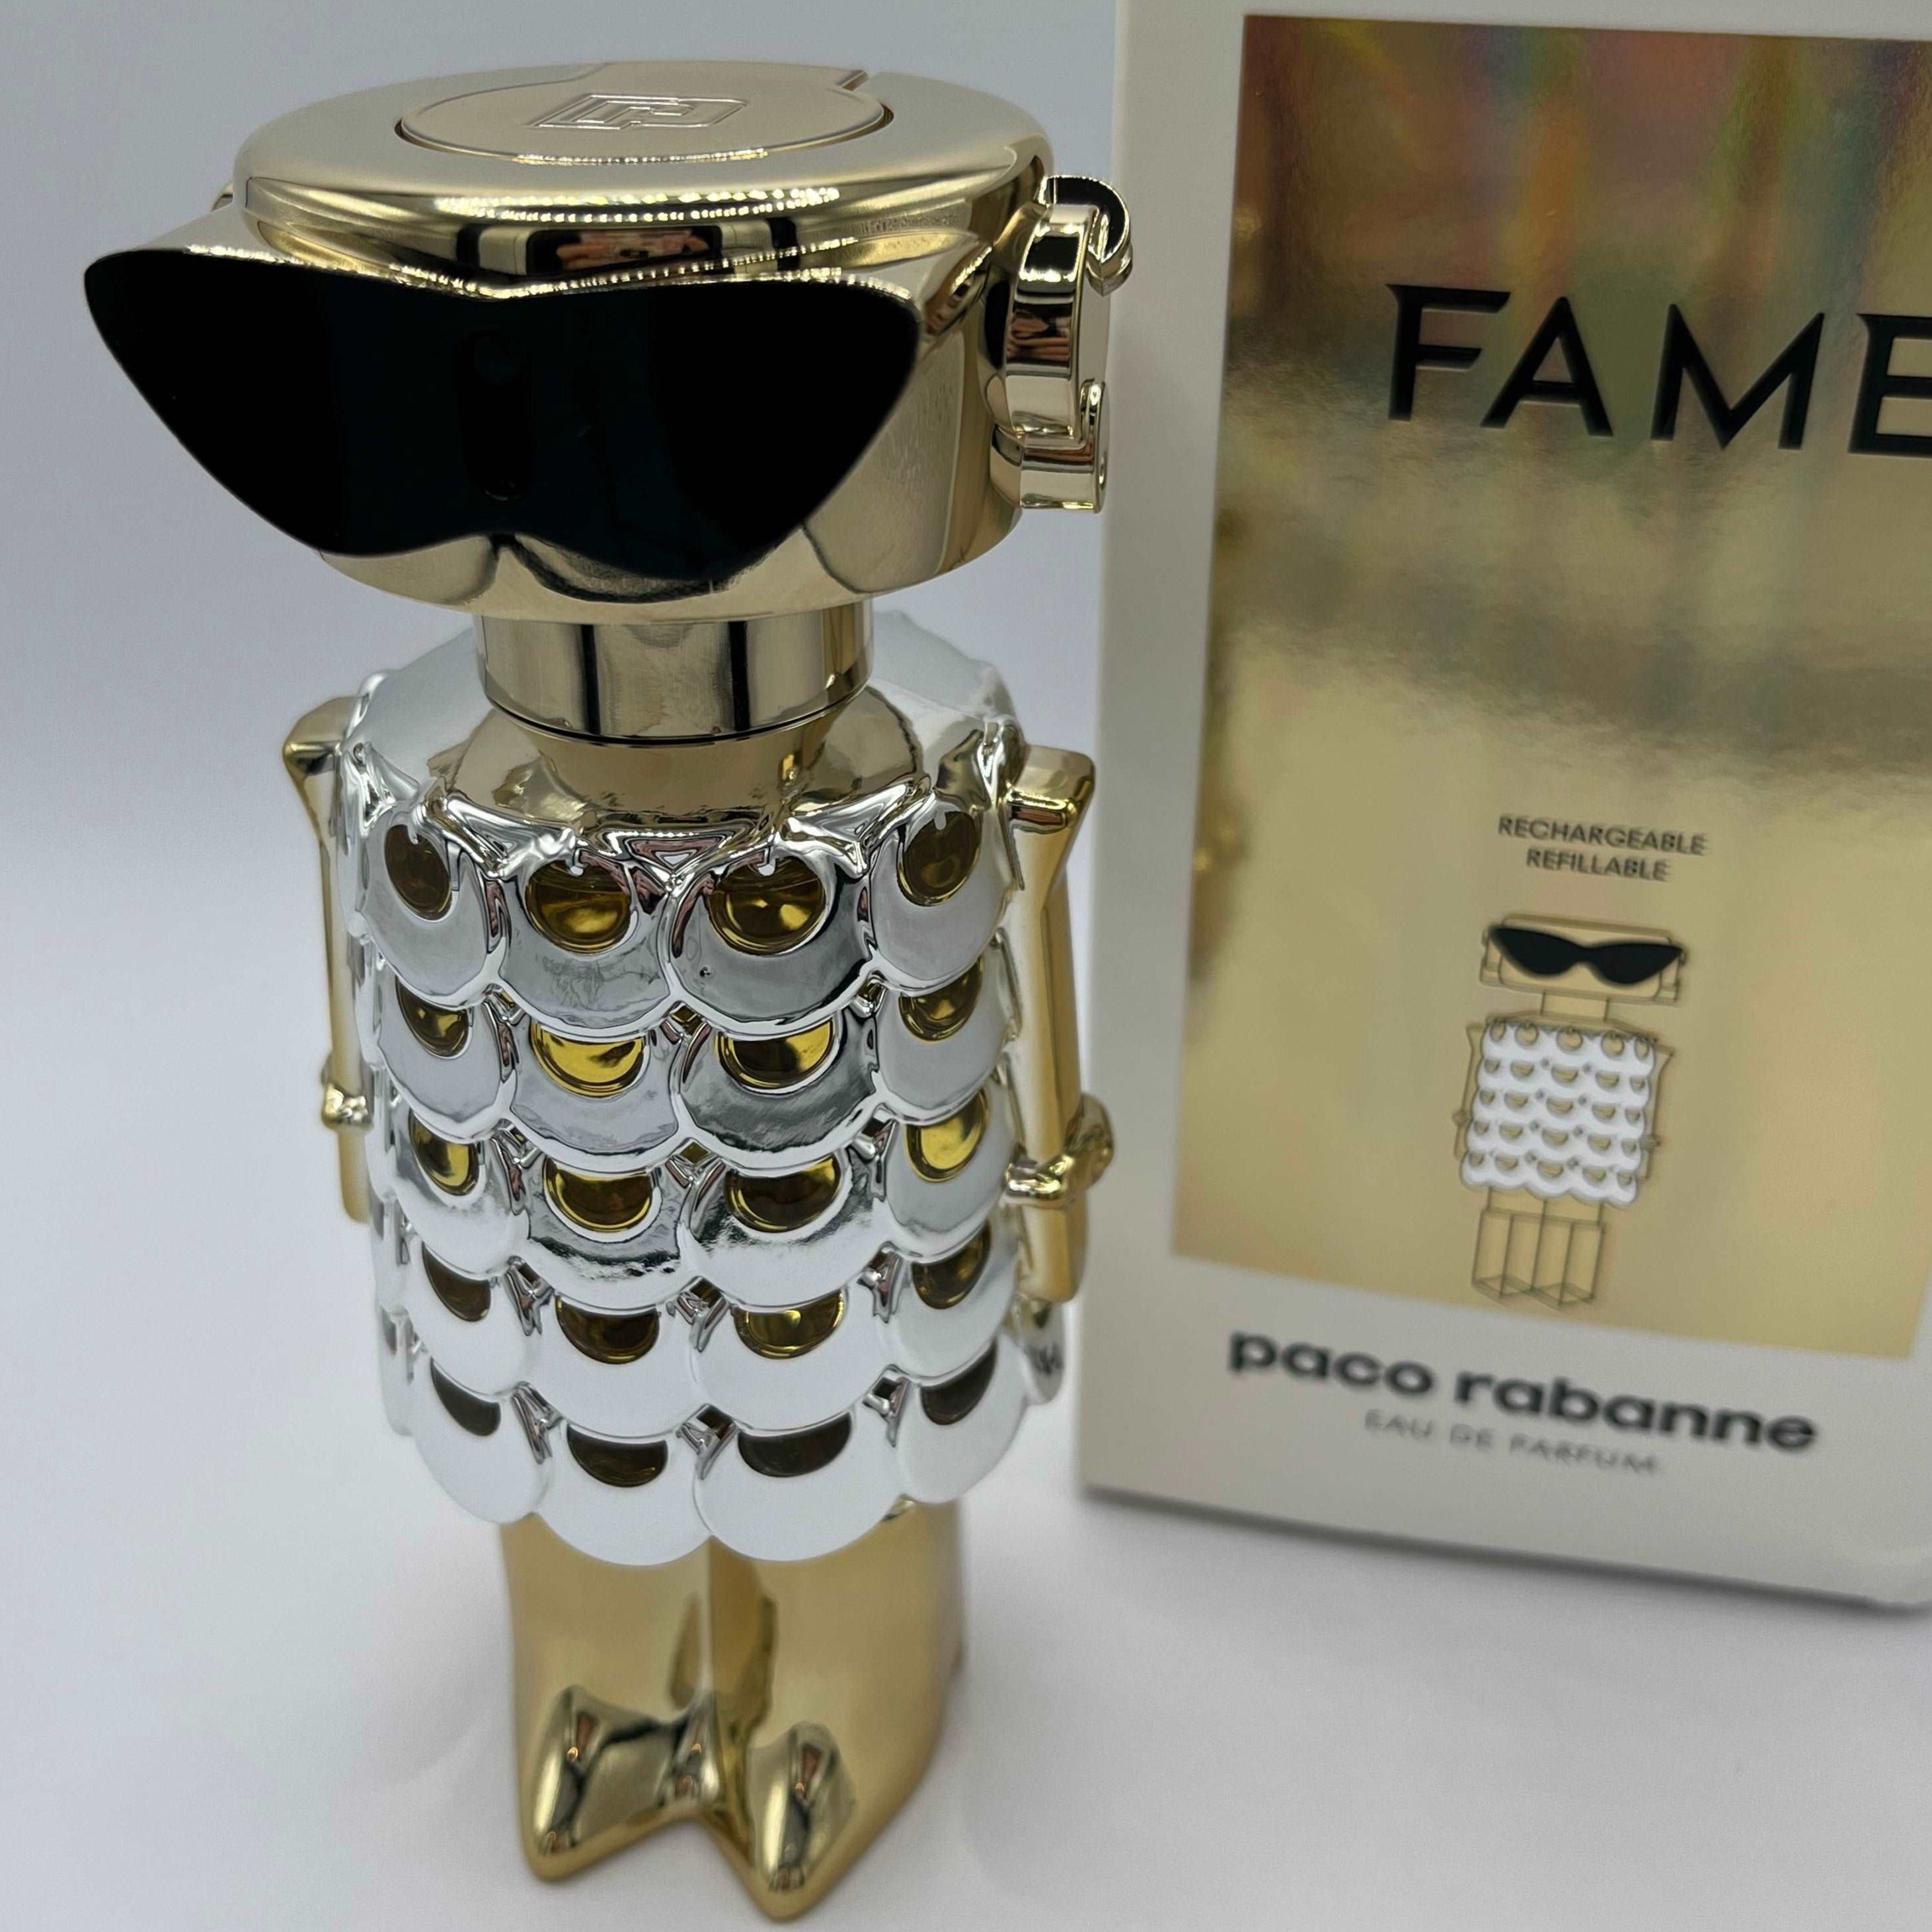 Paco Rabanne - Fame Samples and Travel Sizes – Scent Discovery